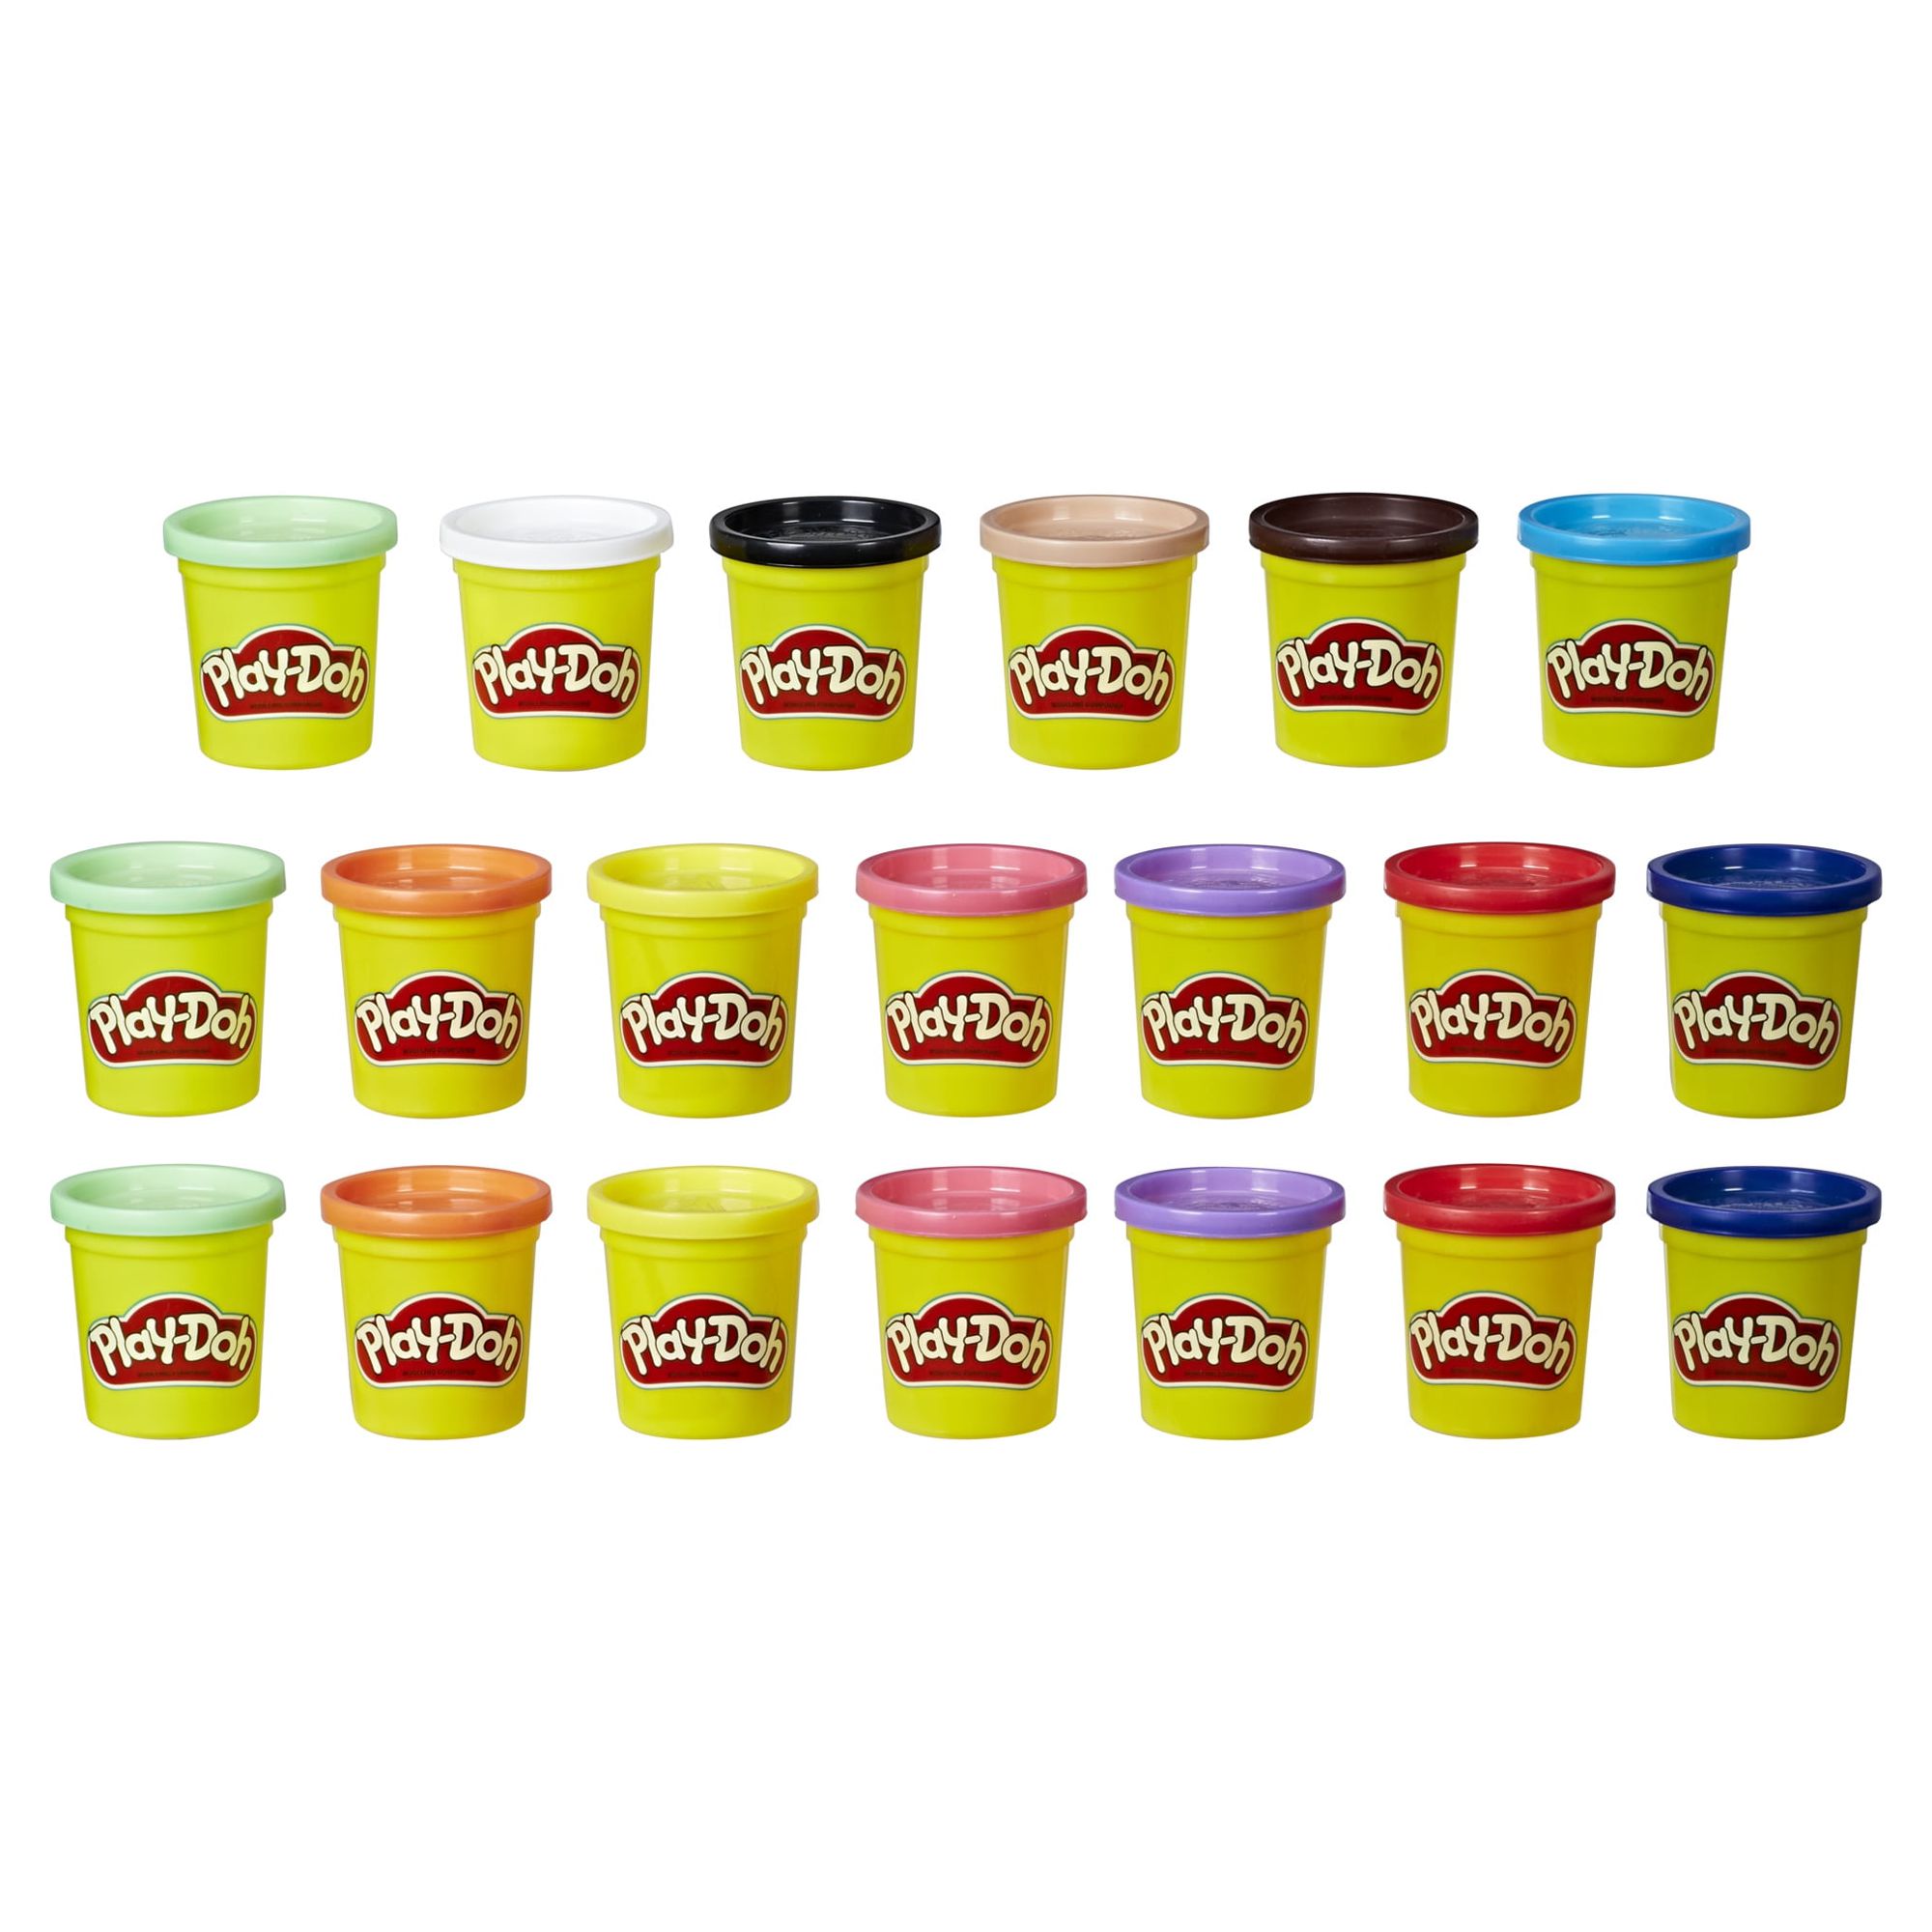 Play-Doh Super Color 20-Pack of 3-Ounce Cans, Kids Toys, Easter Basket Stuffers, Egg Fillers - image 3 of 4